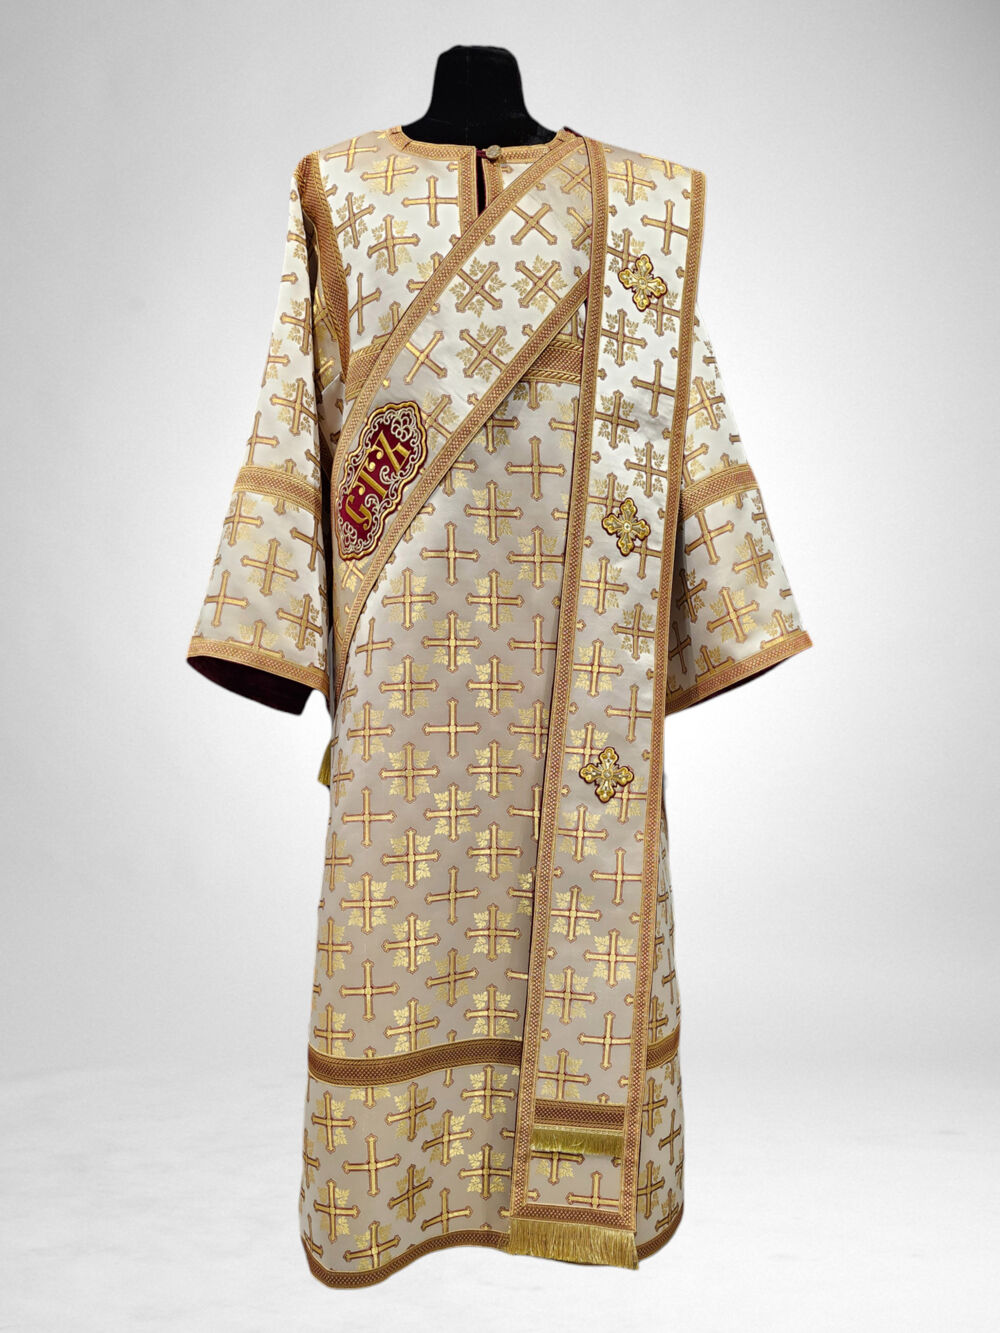 Deacon's vestment with double orarion